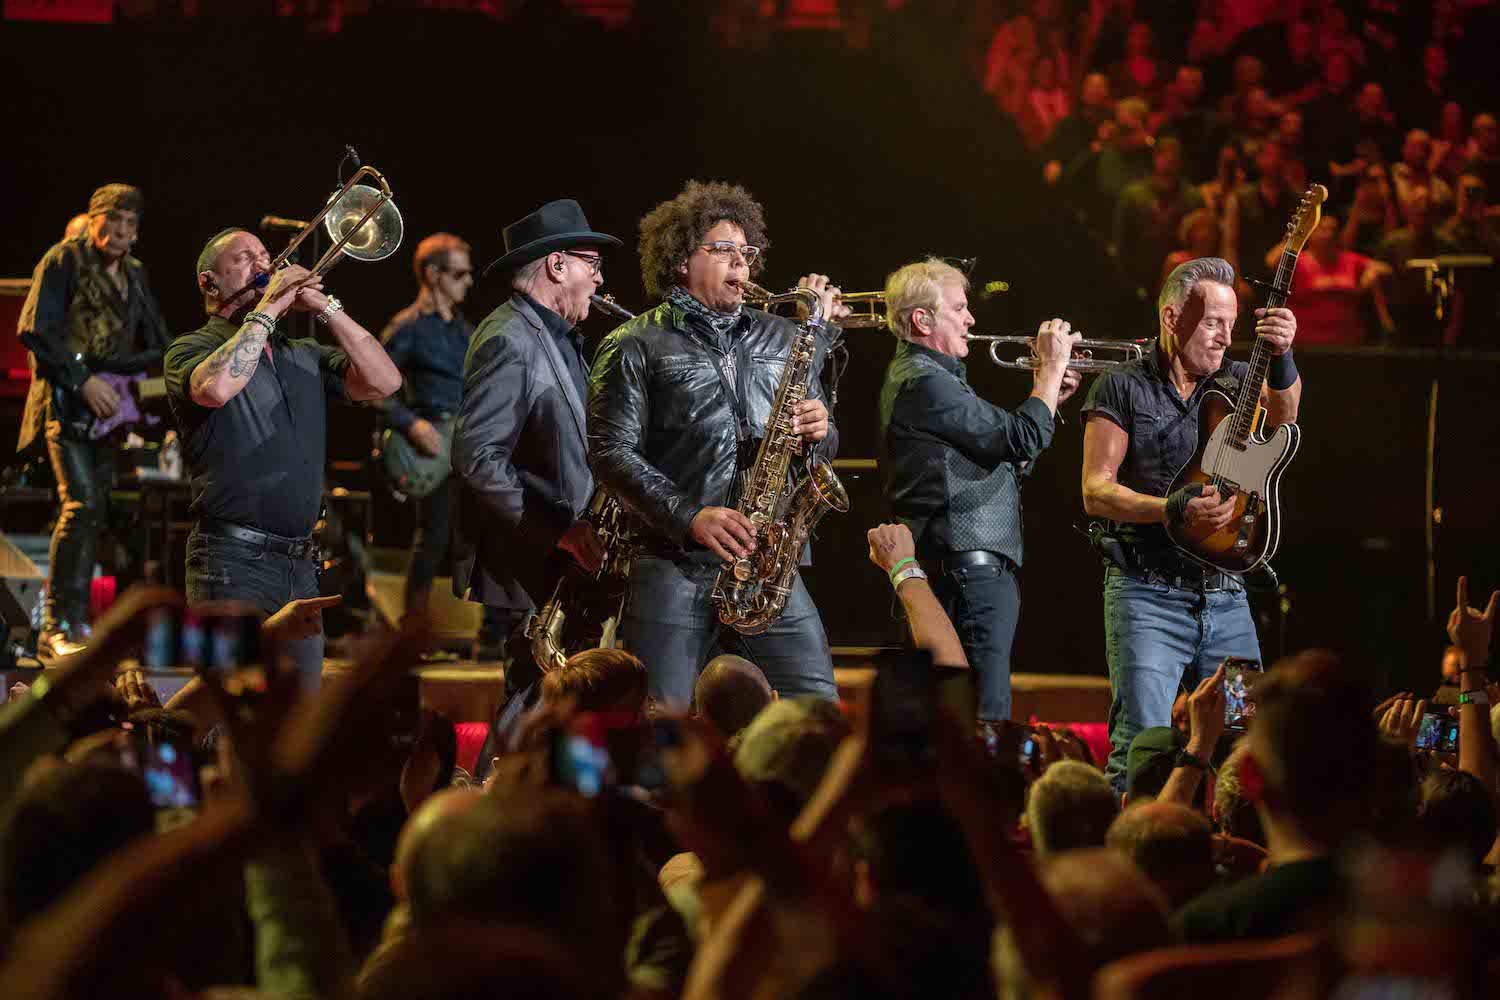 Bruce Springsteen & E Street Band at Barclays Center, Brooklyn, NY on April 3, 2023.